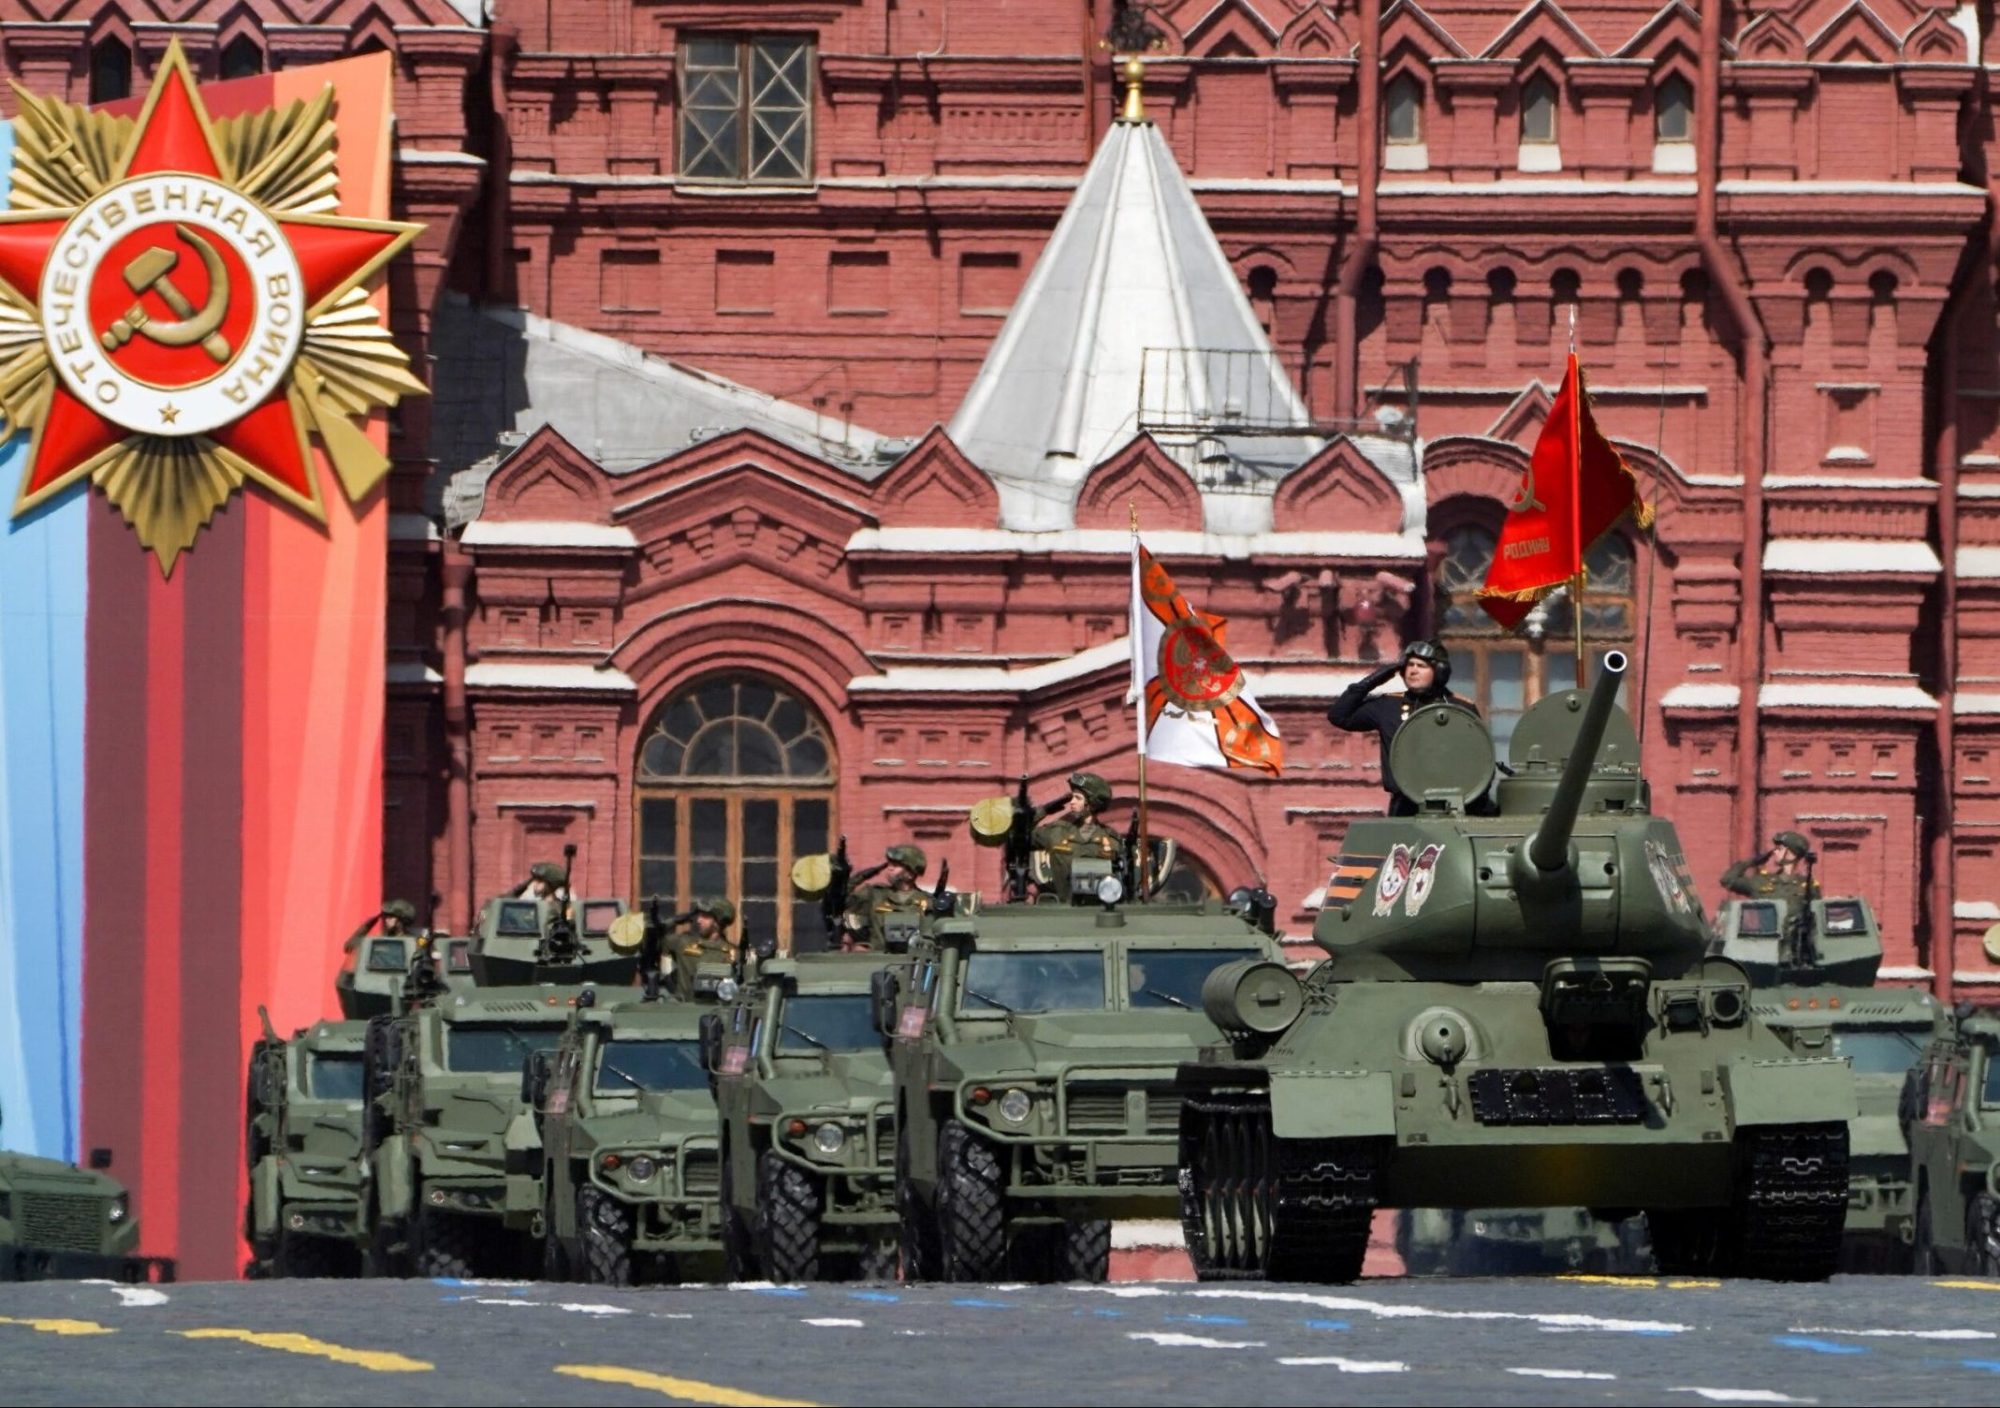 Putin’s embarrassing parade hints at catastrophic losses in